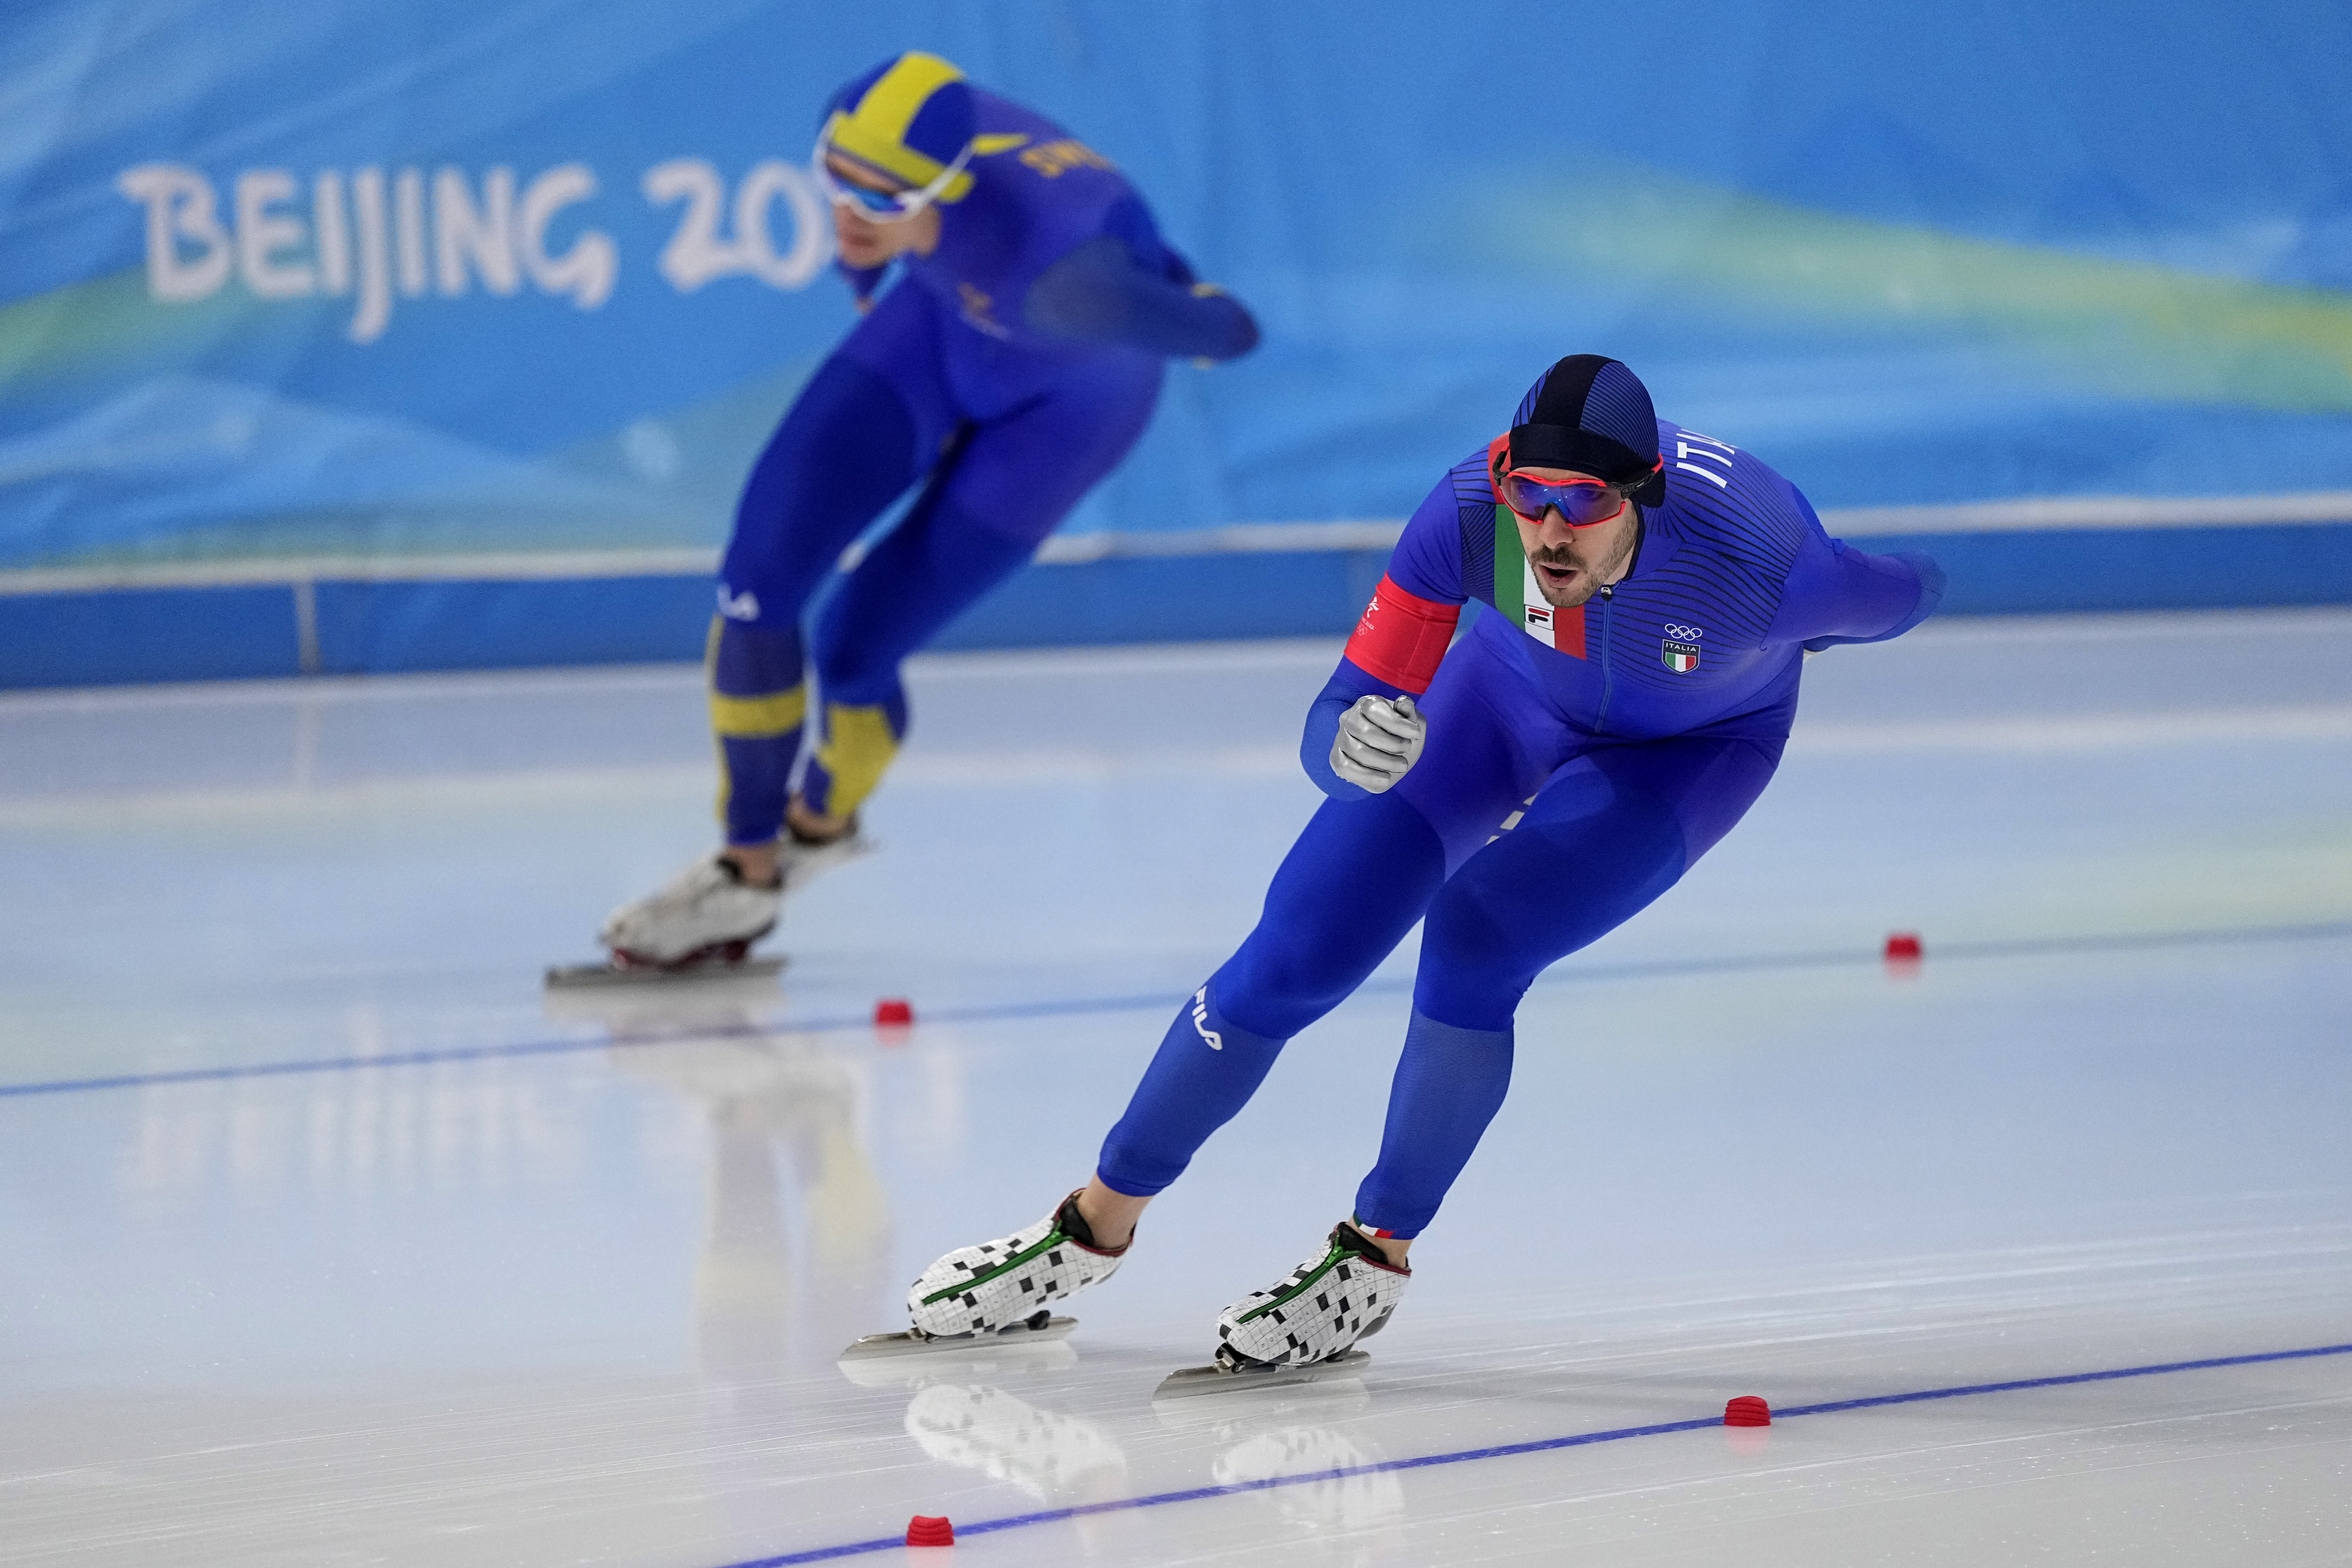 <p>Davide Ghiotto of Italy, foreground, competes against Nils van der Poel of Sweden in the men&#8217;s speedskating 10,000-meter race at the 2022 Winter Olympics, Friday, Feb. 11, 2022, in Beijing.</p>
